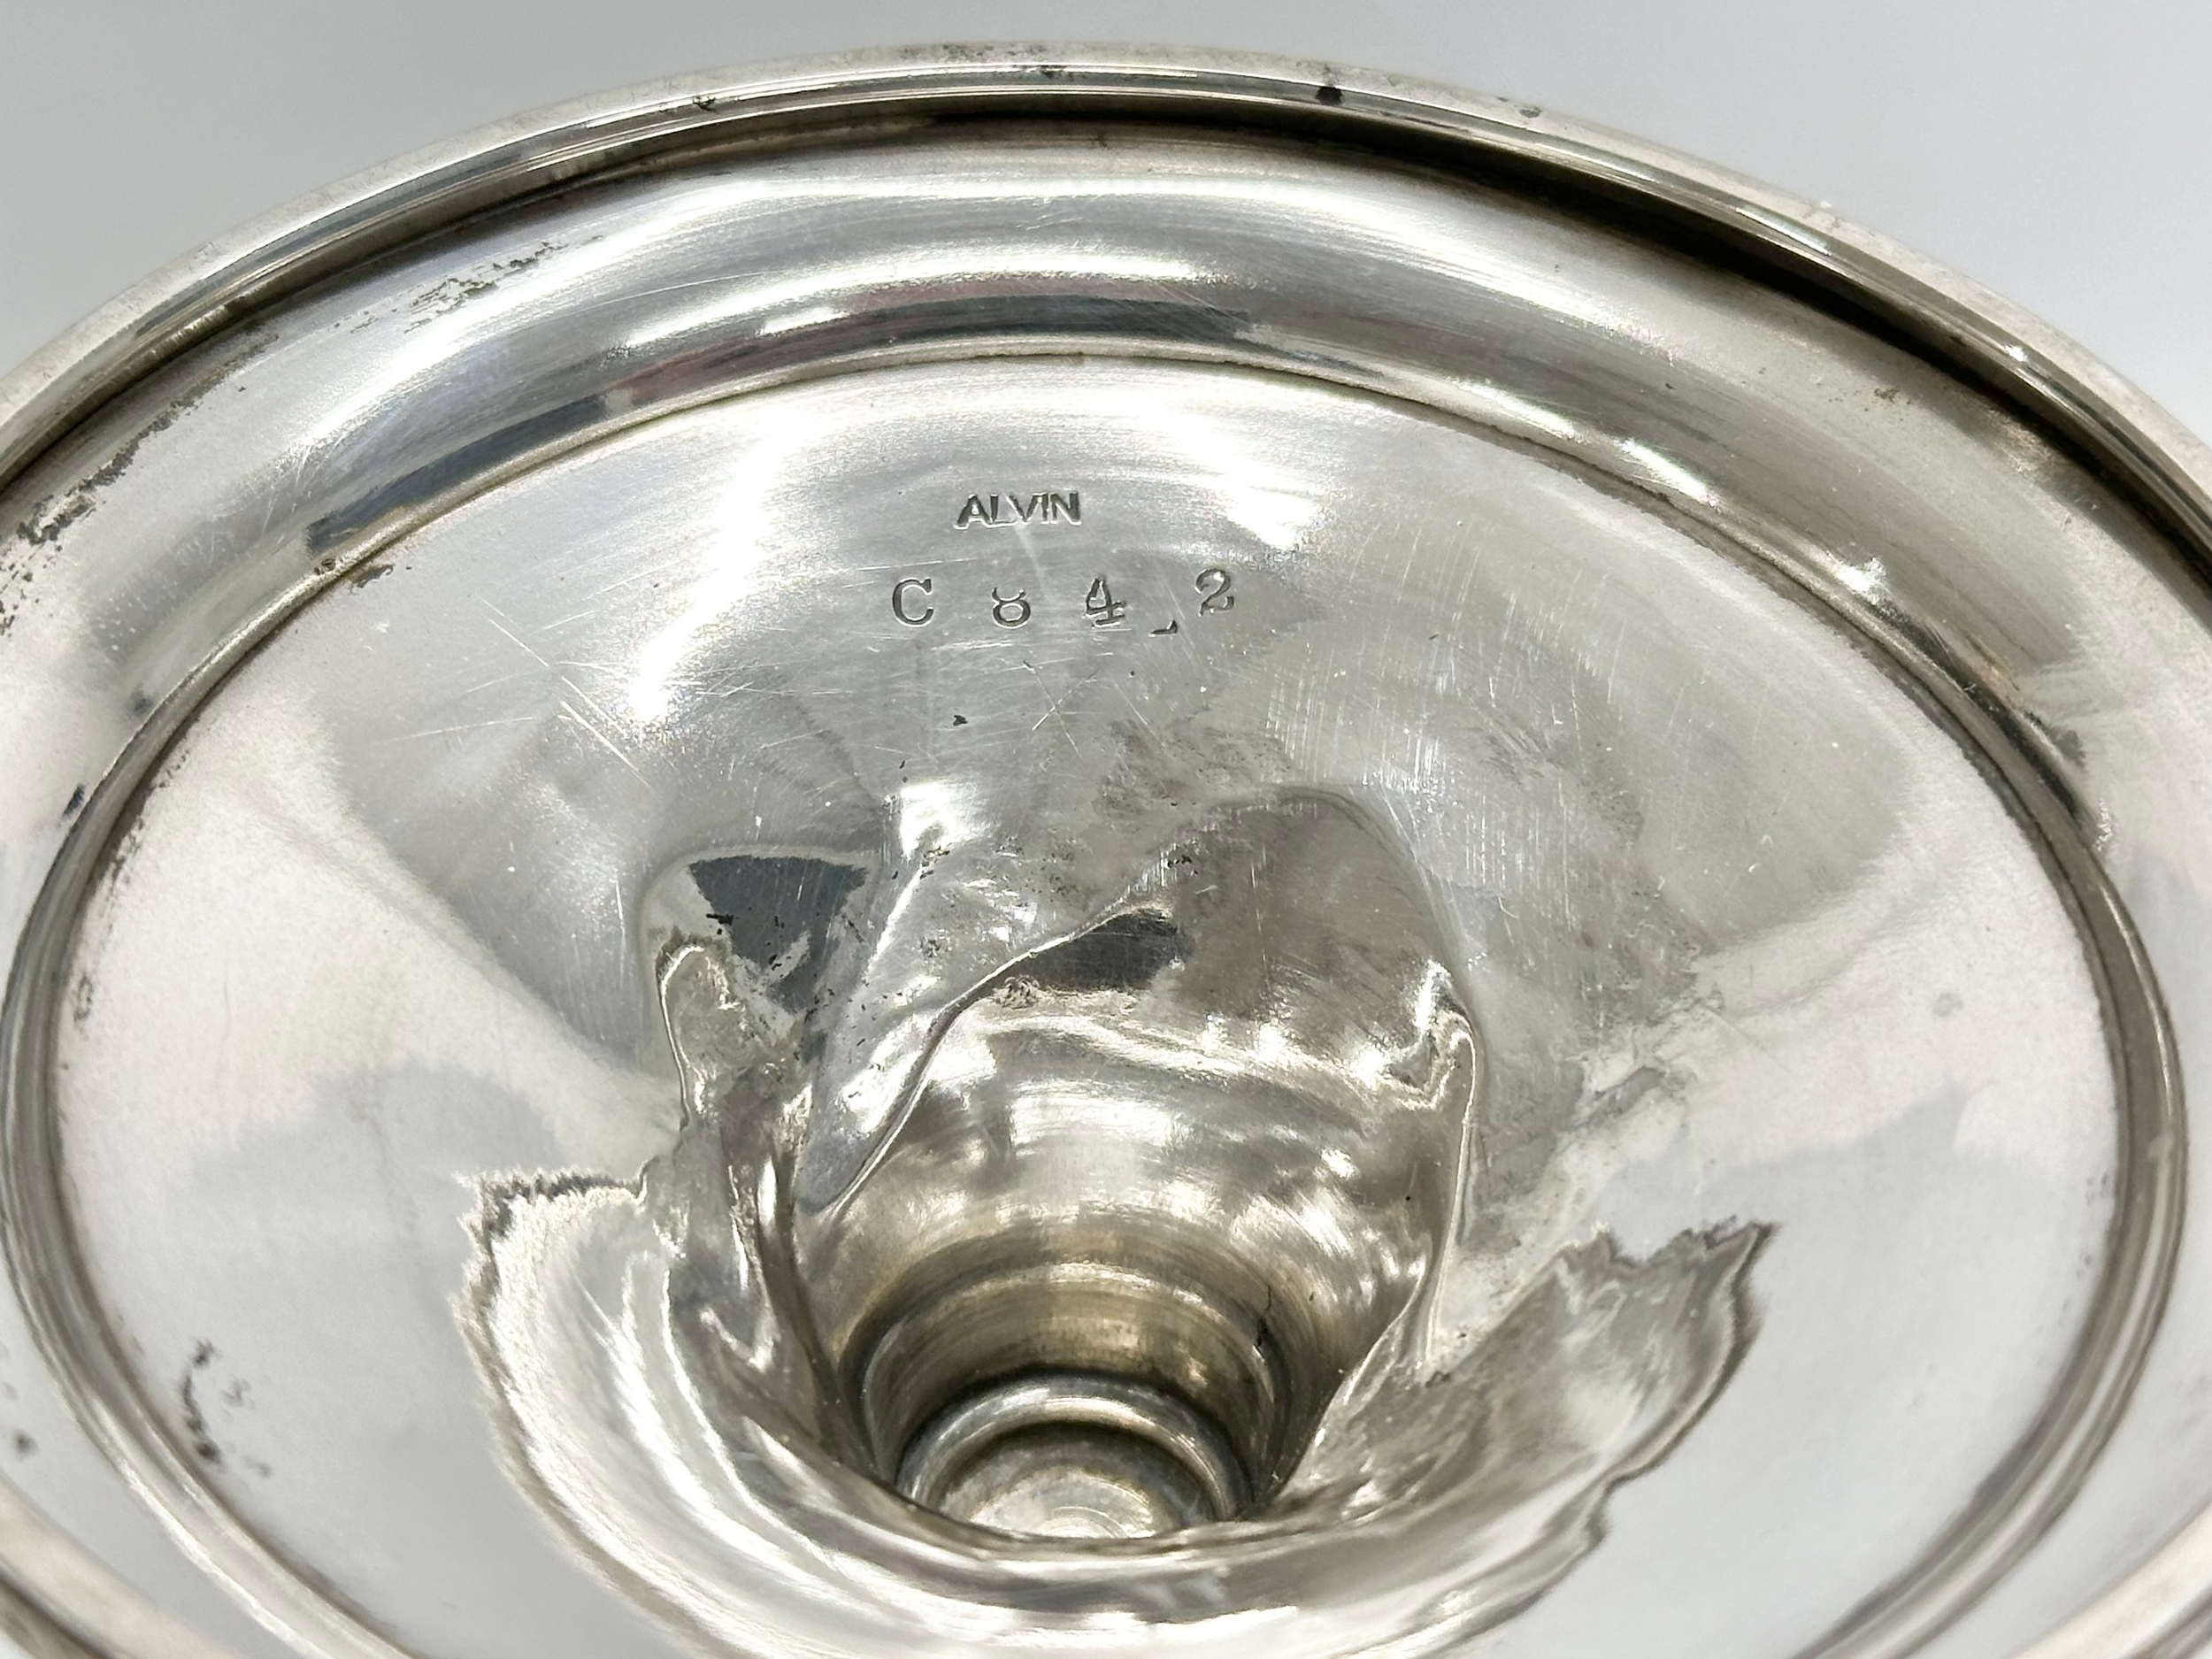 A late 19th/early 20th century sterling silver tazza by Alvin. 15.5x16cm. 128.81 grams. - Image 5 of 6